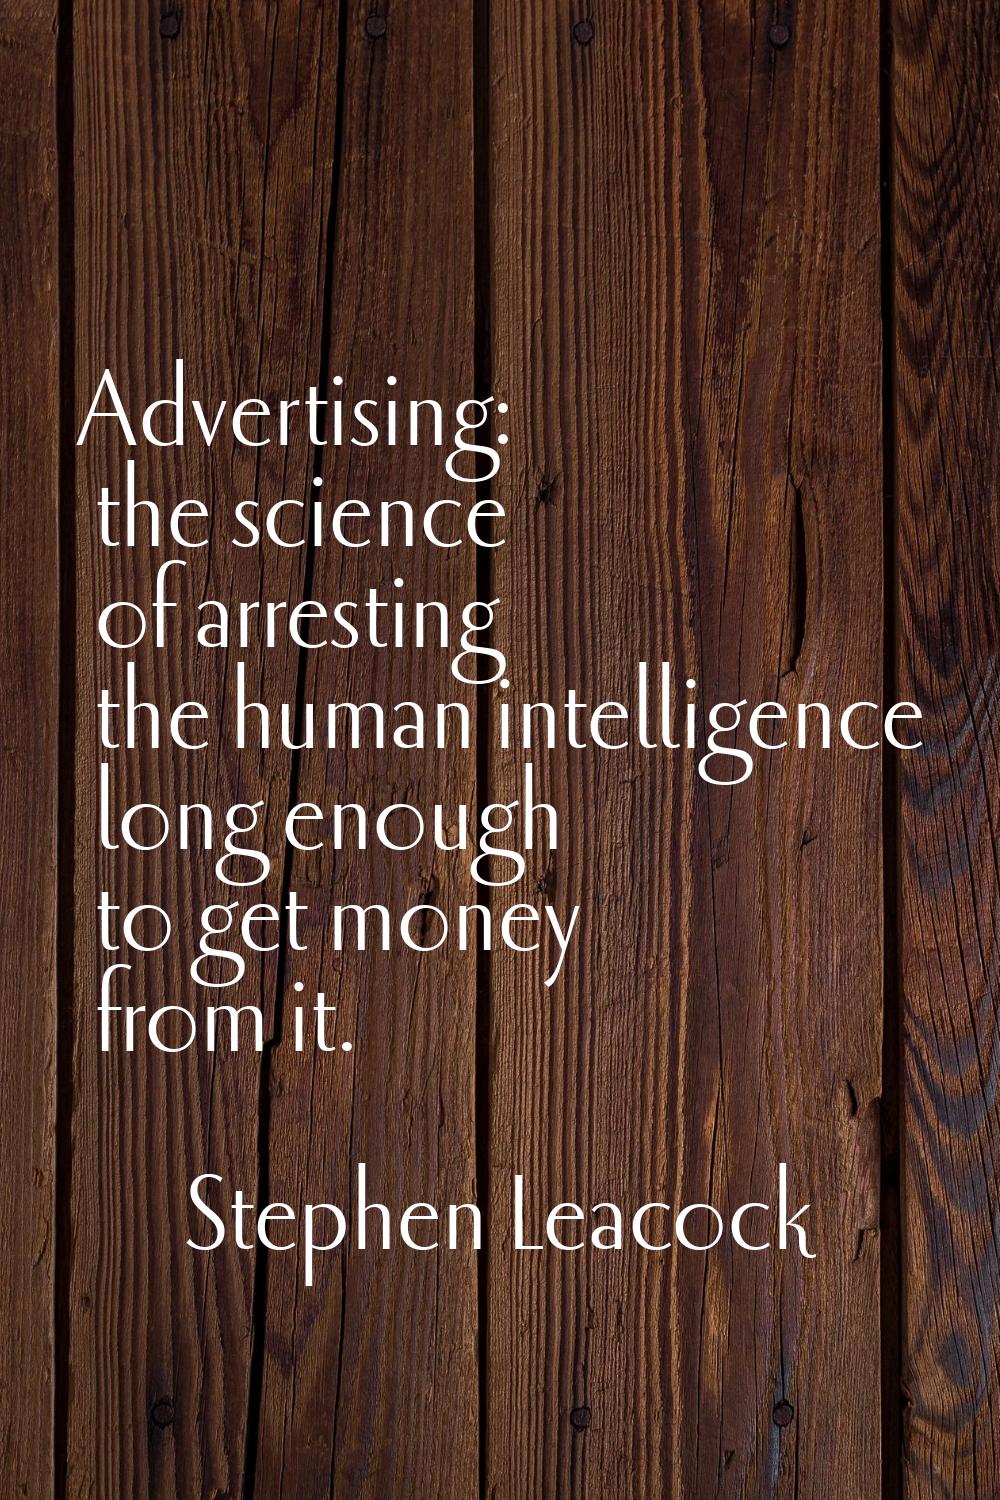 Advertising: the science of arresting the human intelligence long enough to get money from it.